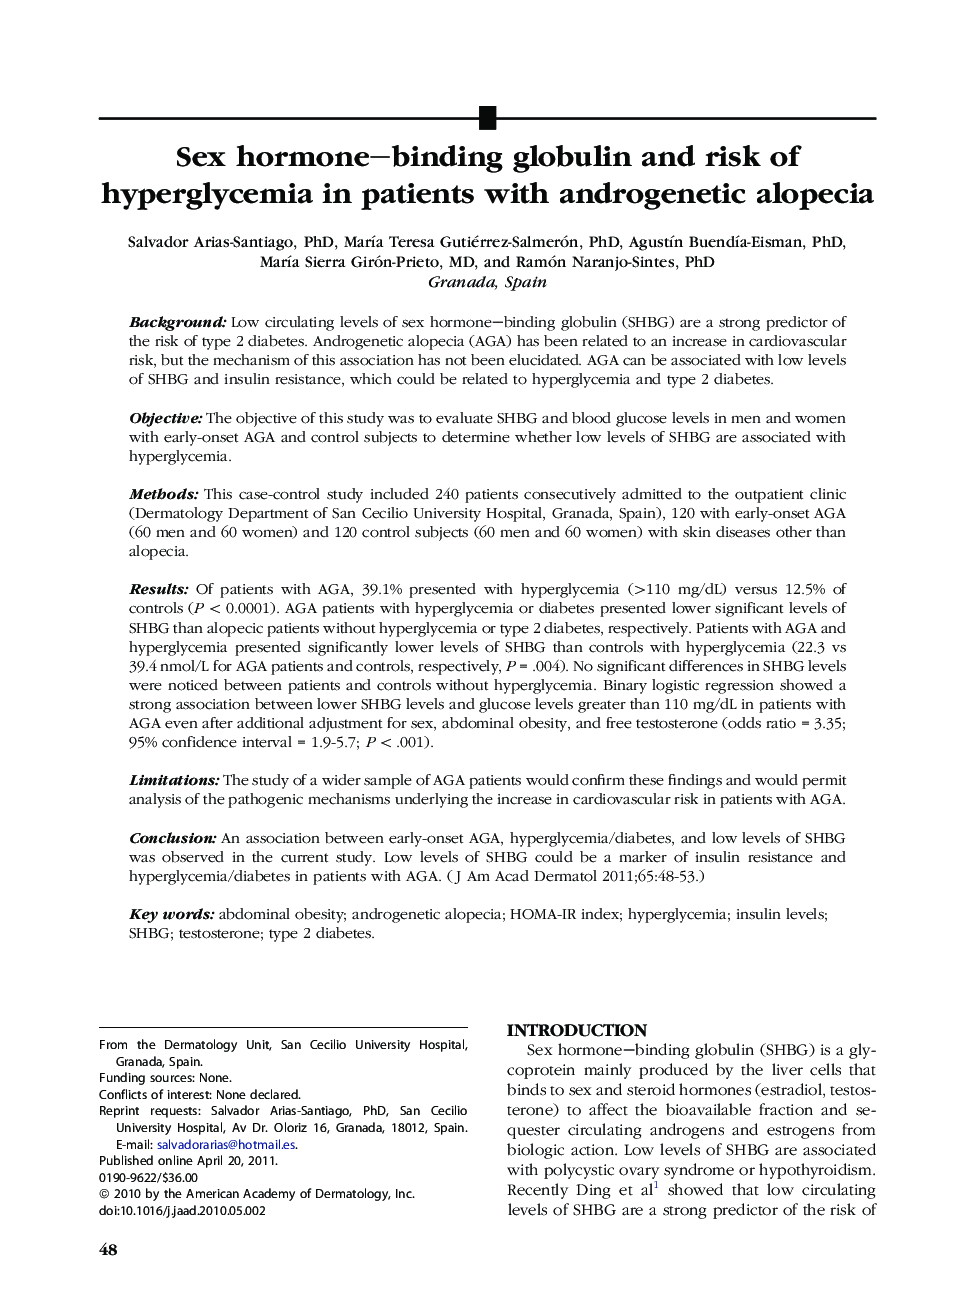 Sex hormone–binding globulin and risk of hyperglycemia in patients with androgenetic alopecia 